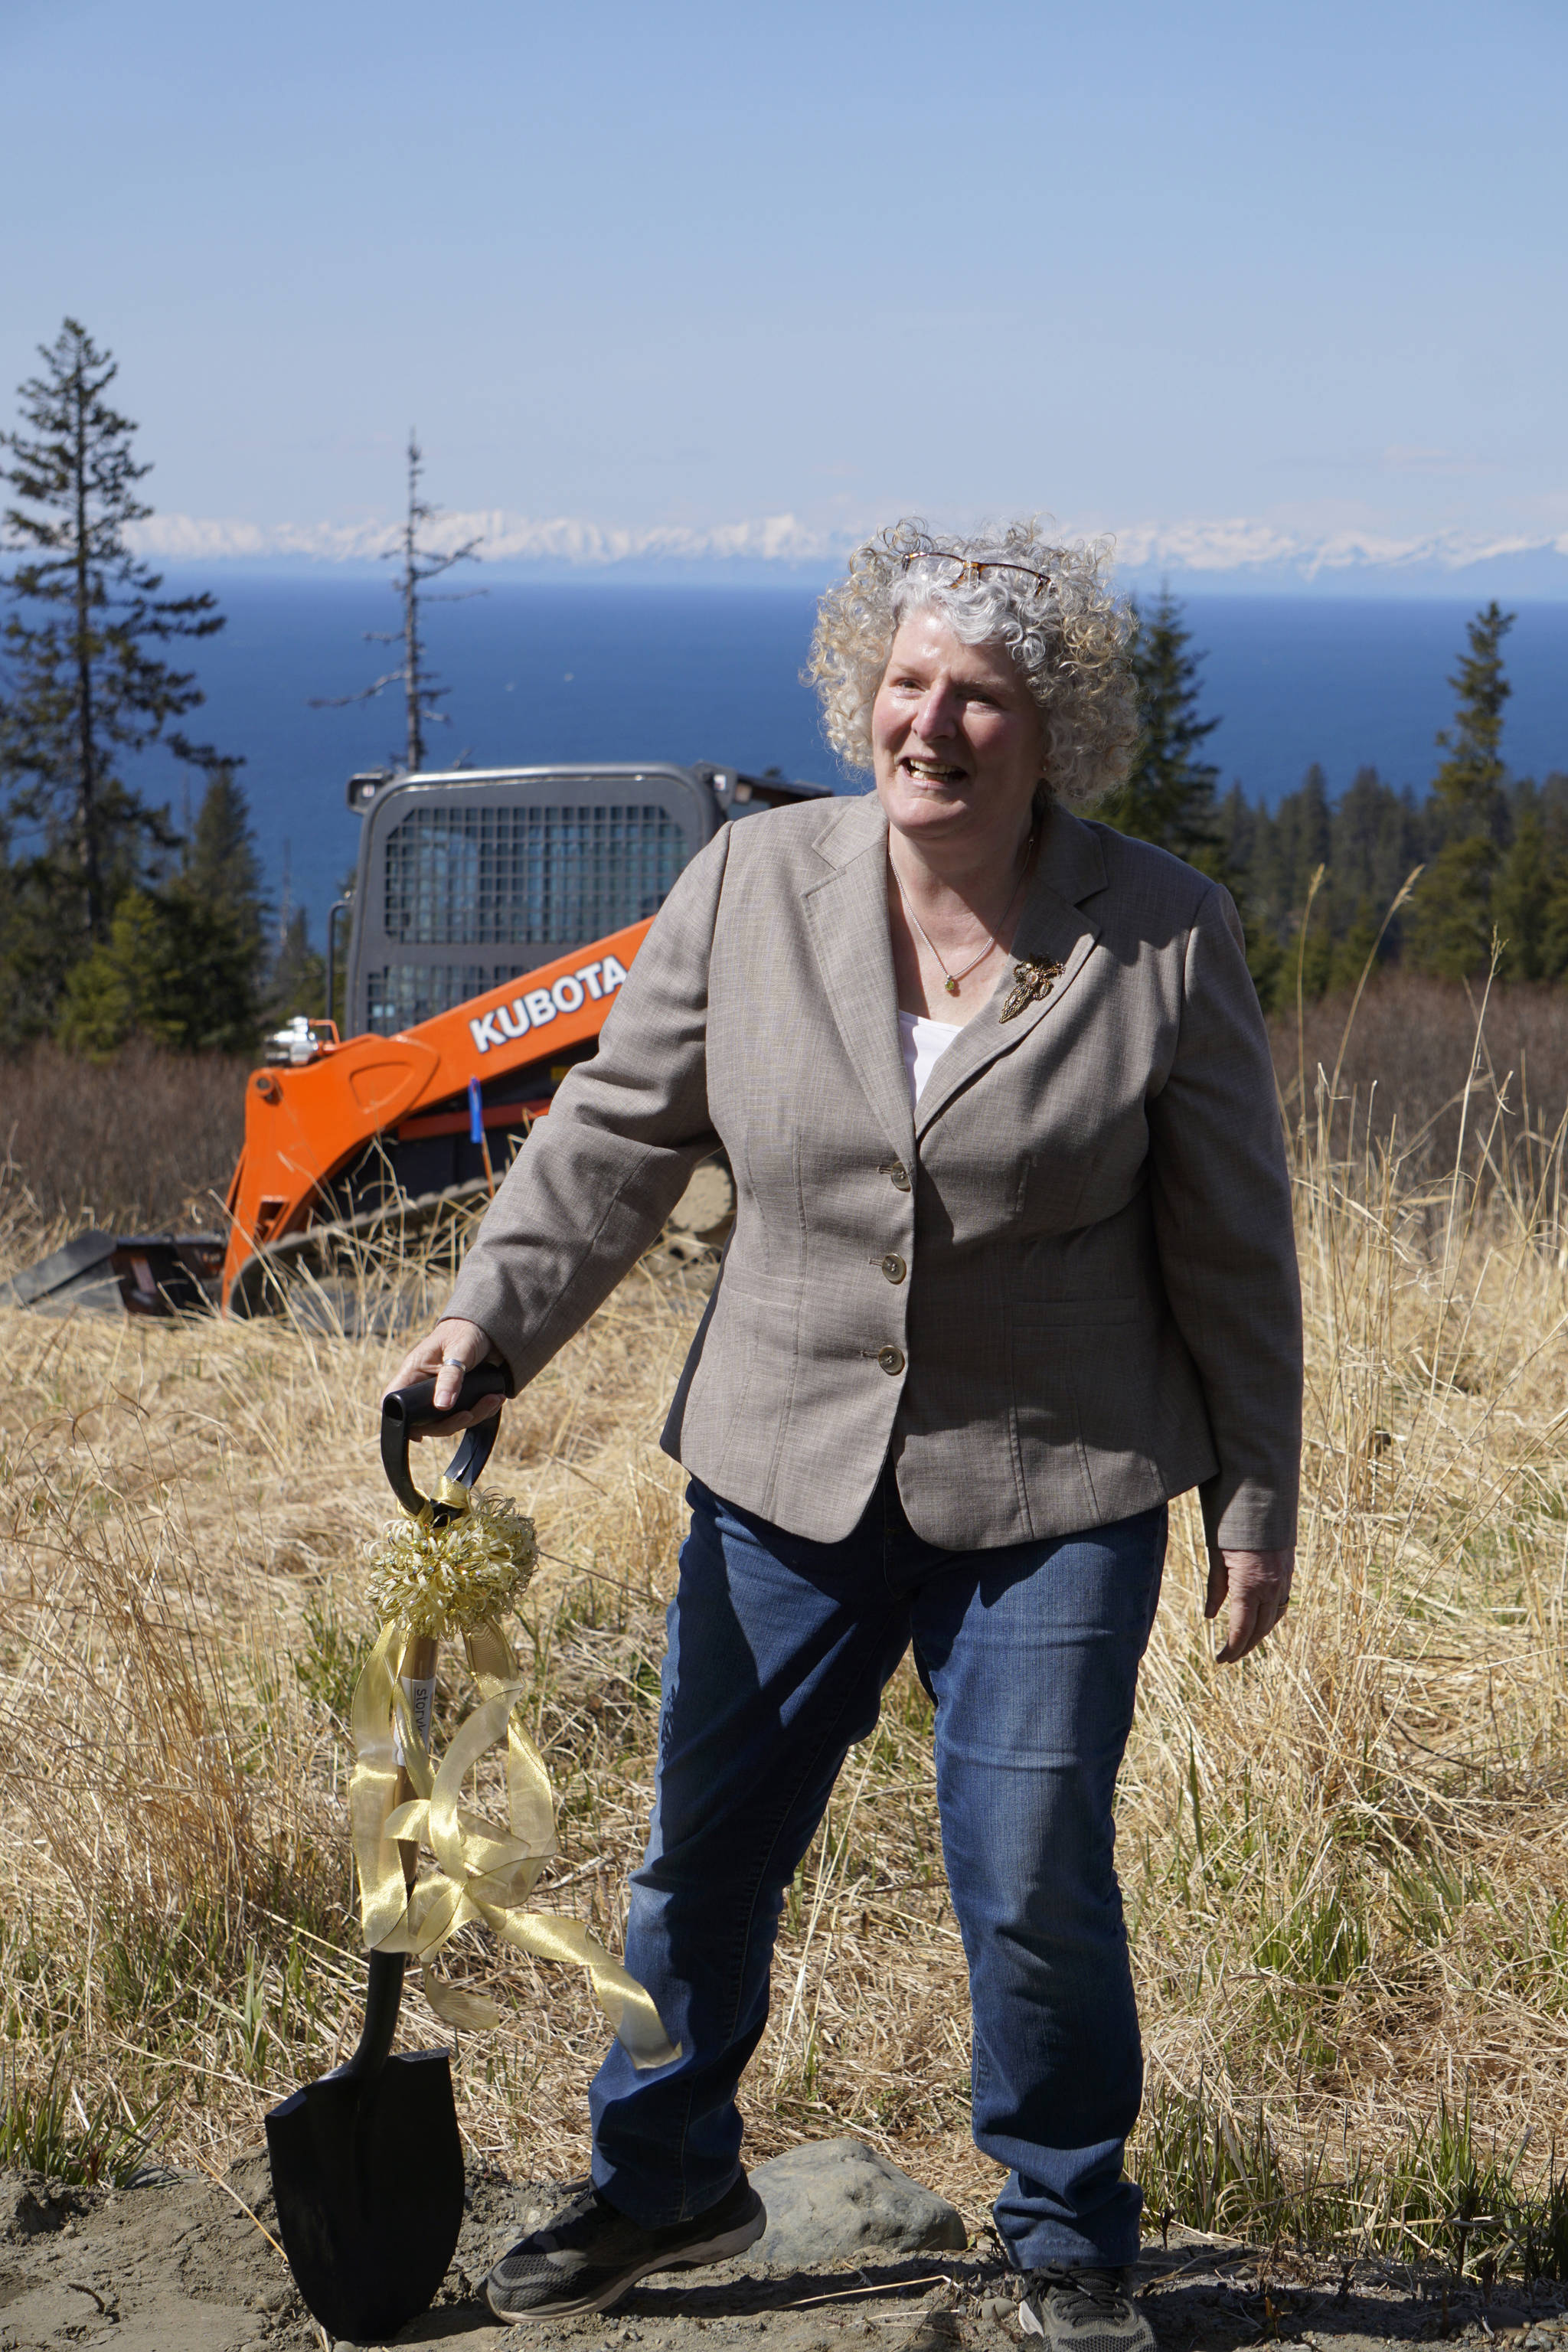 Homer writer and Storyknife Writers Retreat founder Dana Stabenow turns the earth at groundbreaking ceremonies on May 4 at the retreat property in Homer. Construction started last summer on the main house and cabins that will in a year house visiting women writers. (Photo by Michael Armstrong/Homer News)